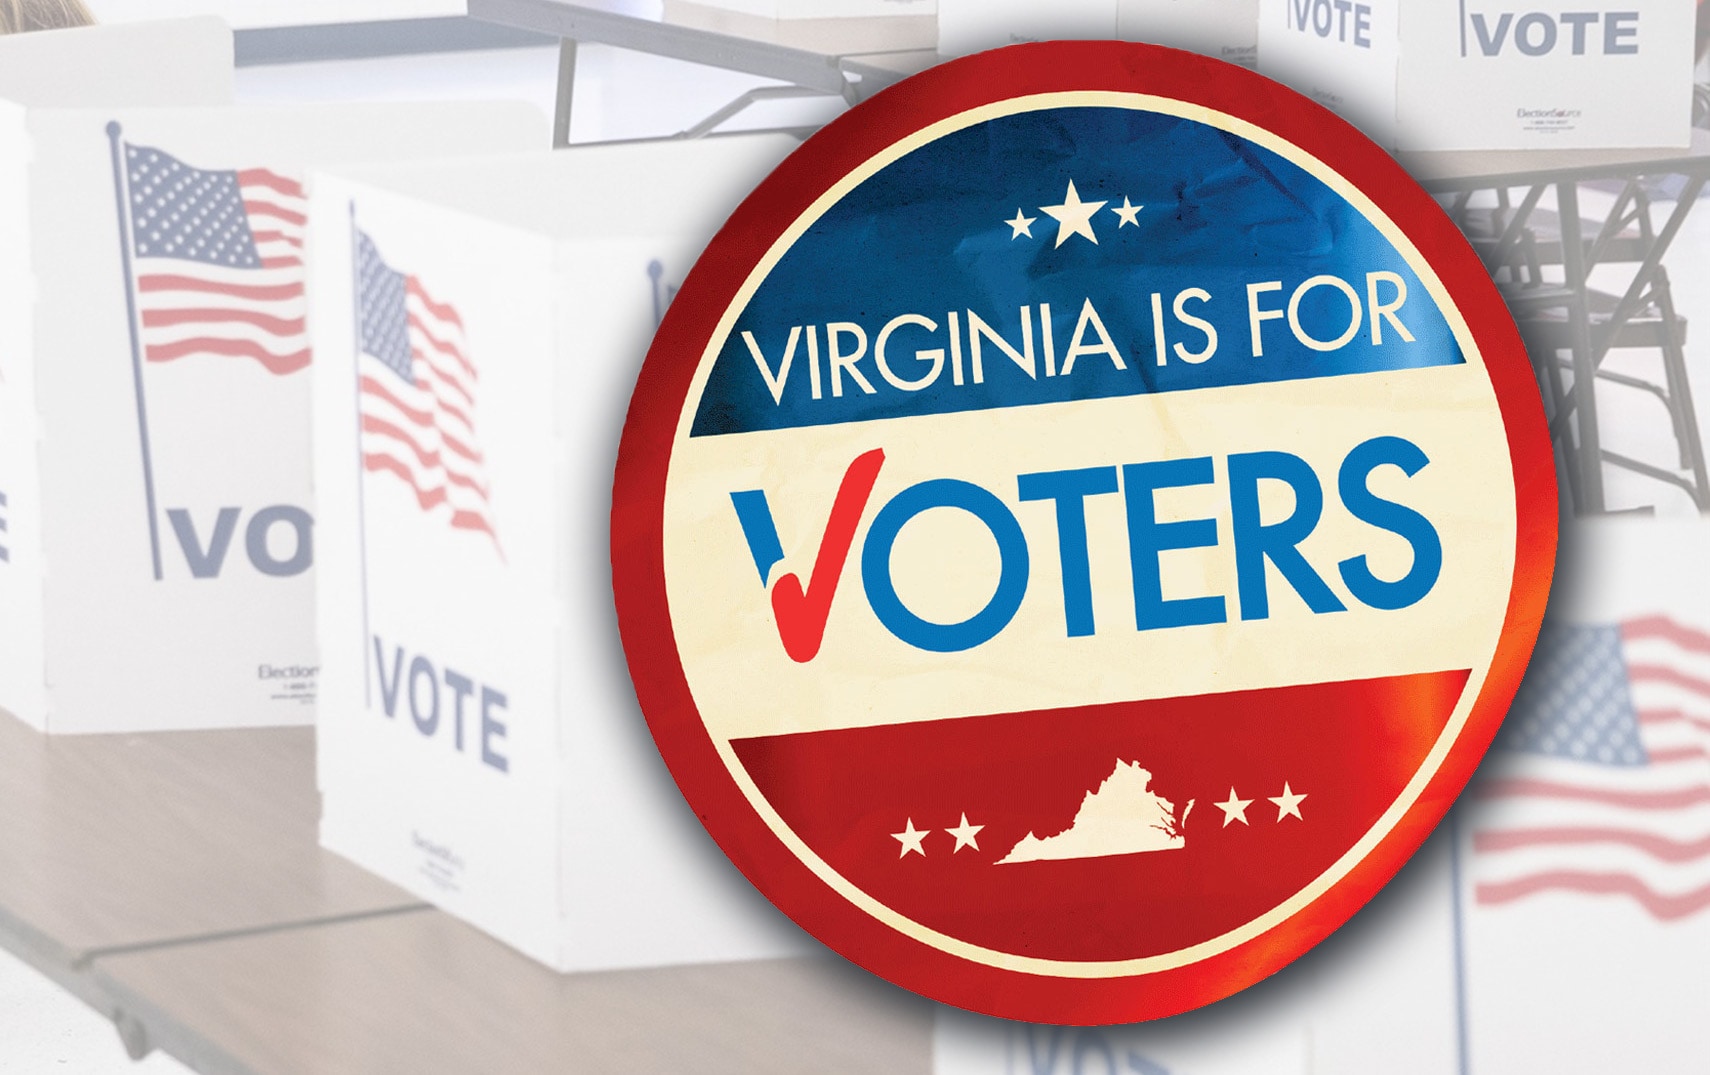 Virginia is for voters sticker